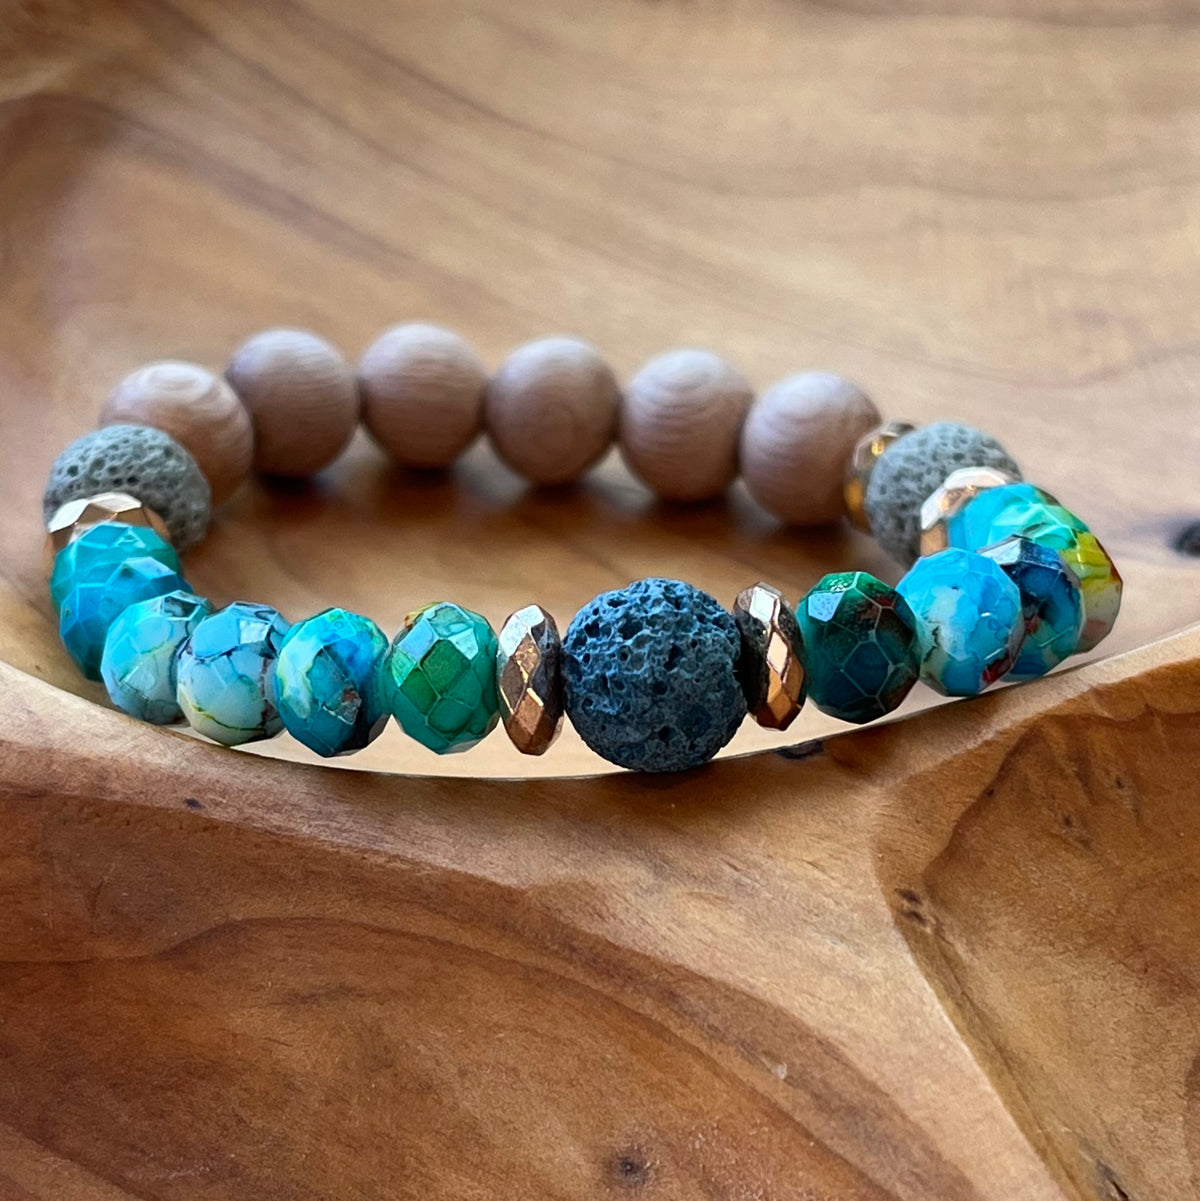 Brown rosewood beads and turquoise ocean colored beaded bracelet. Three lava rock beads for essential oils.